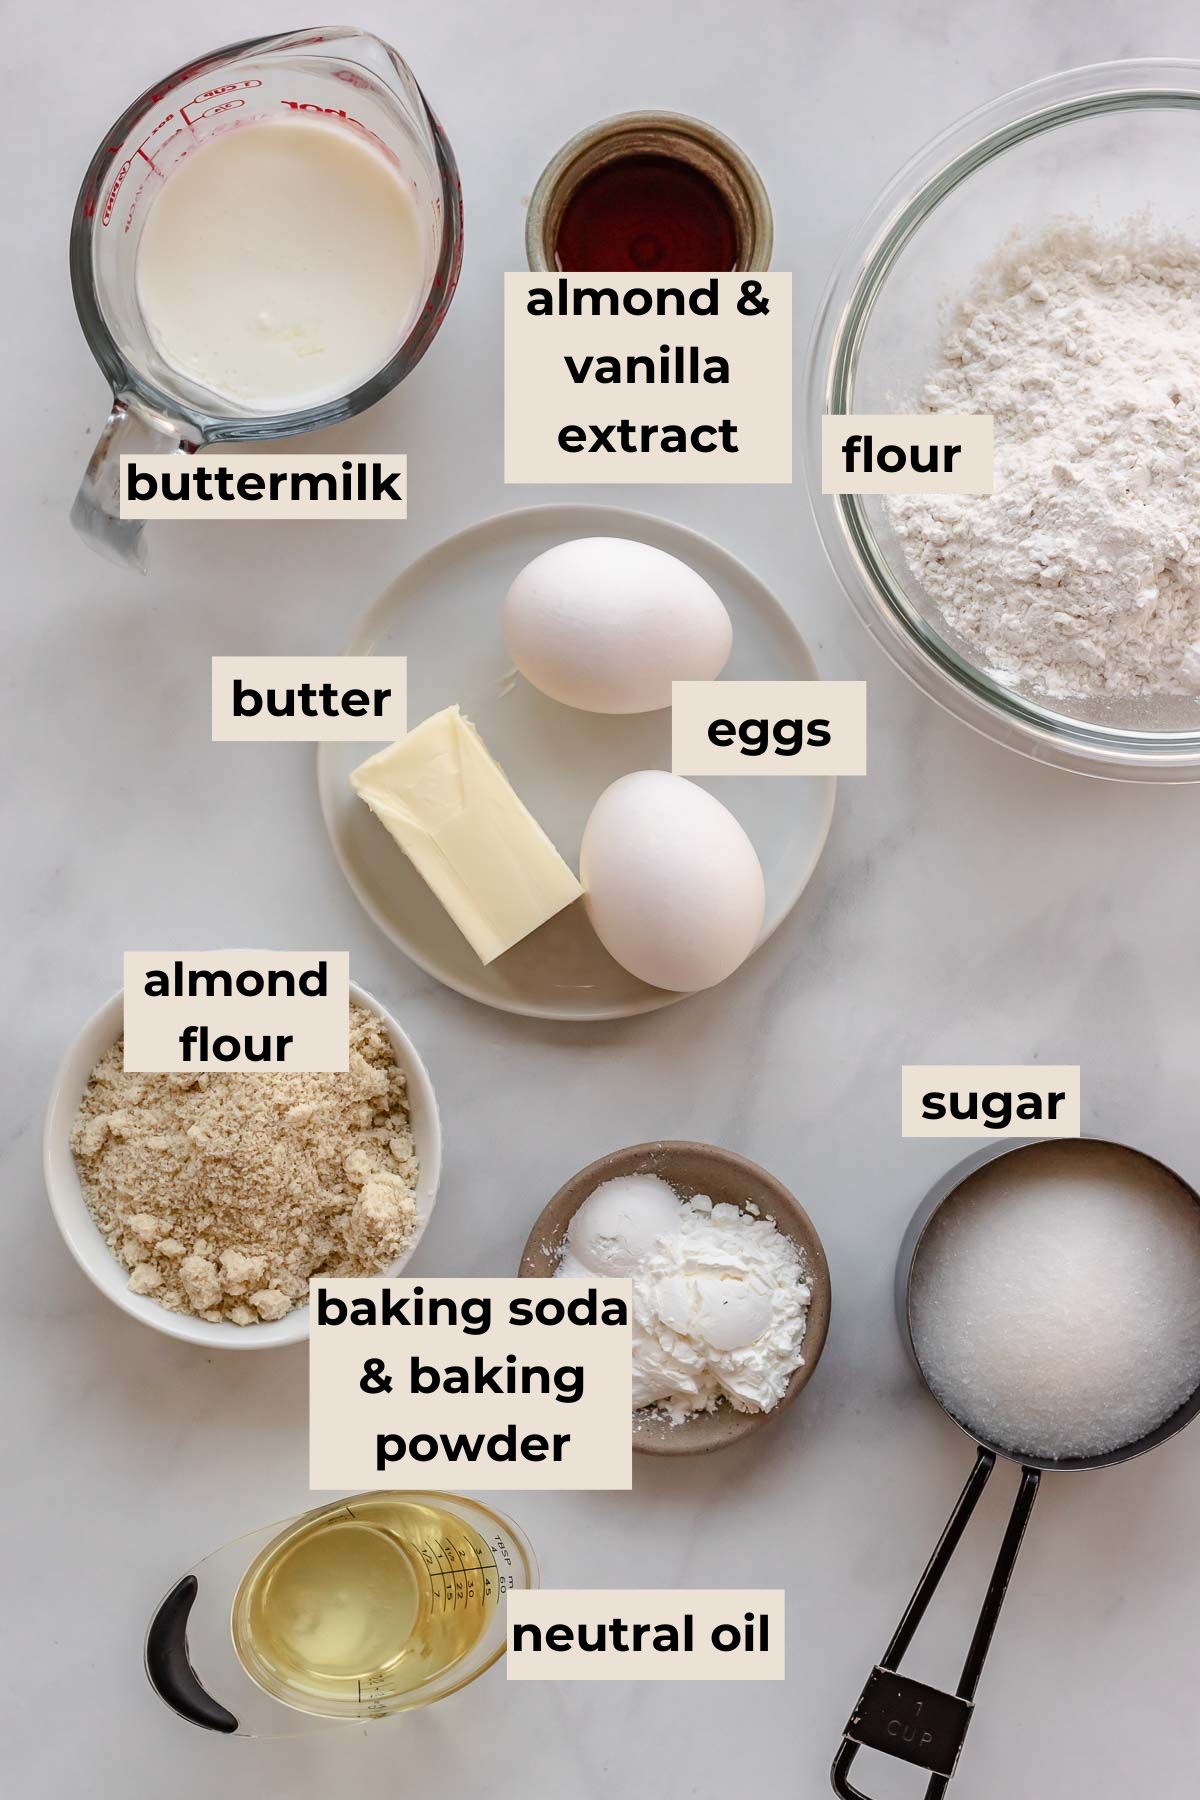 Ingredients for almond cake.